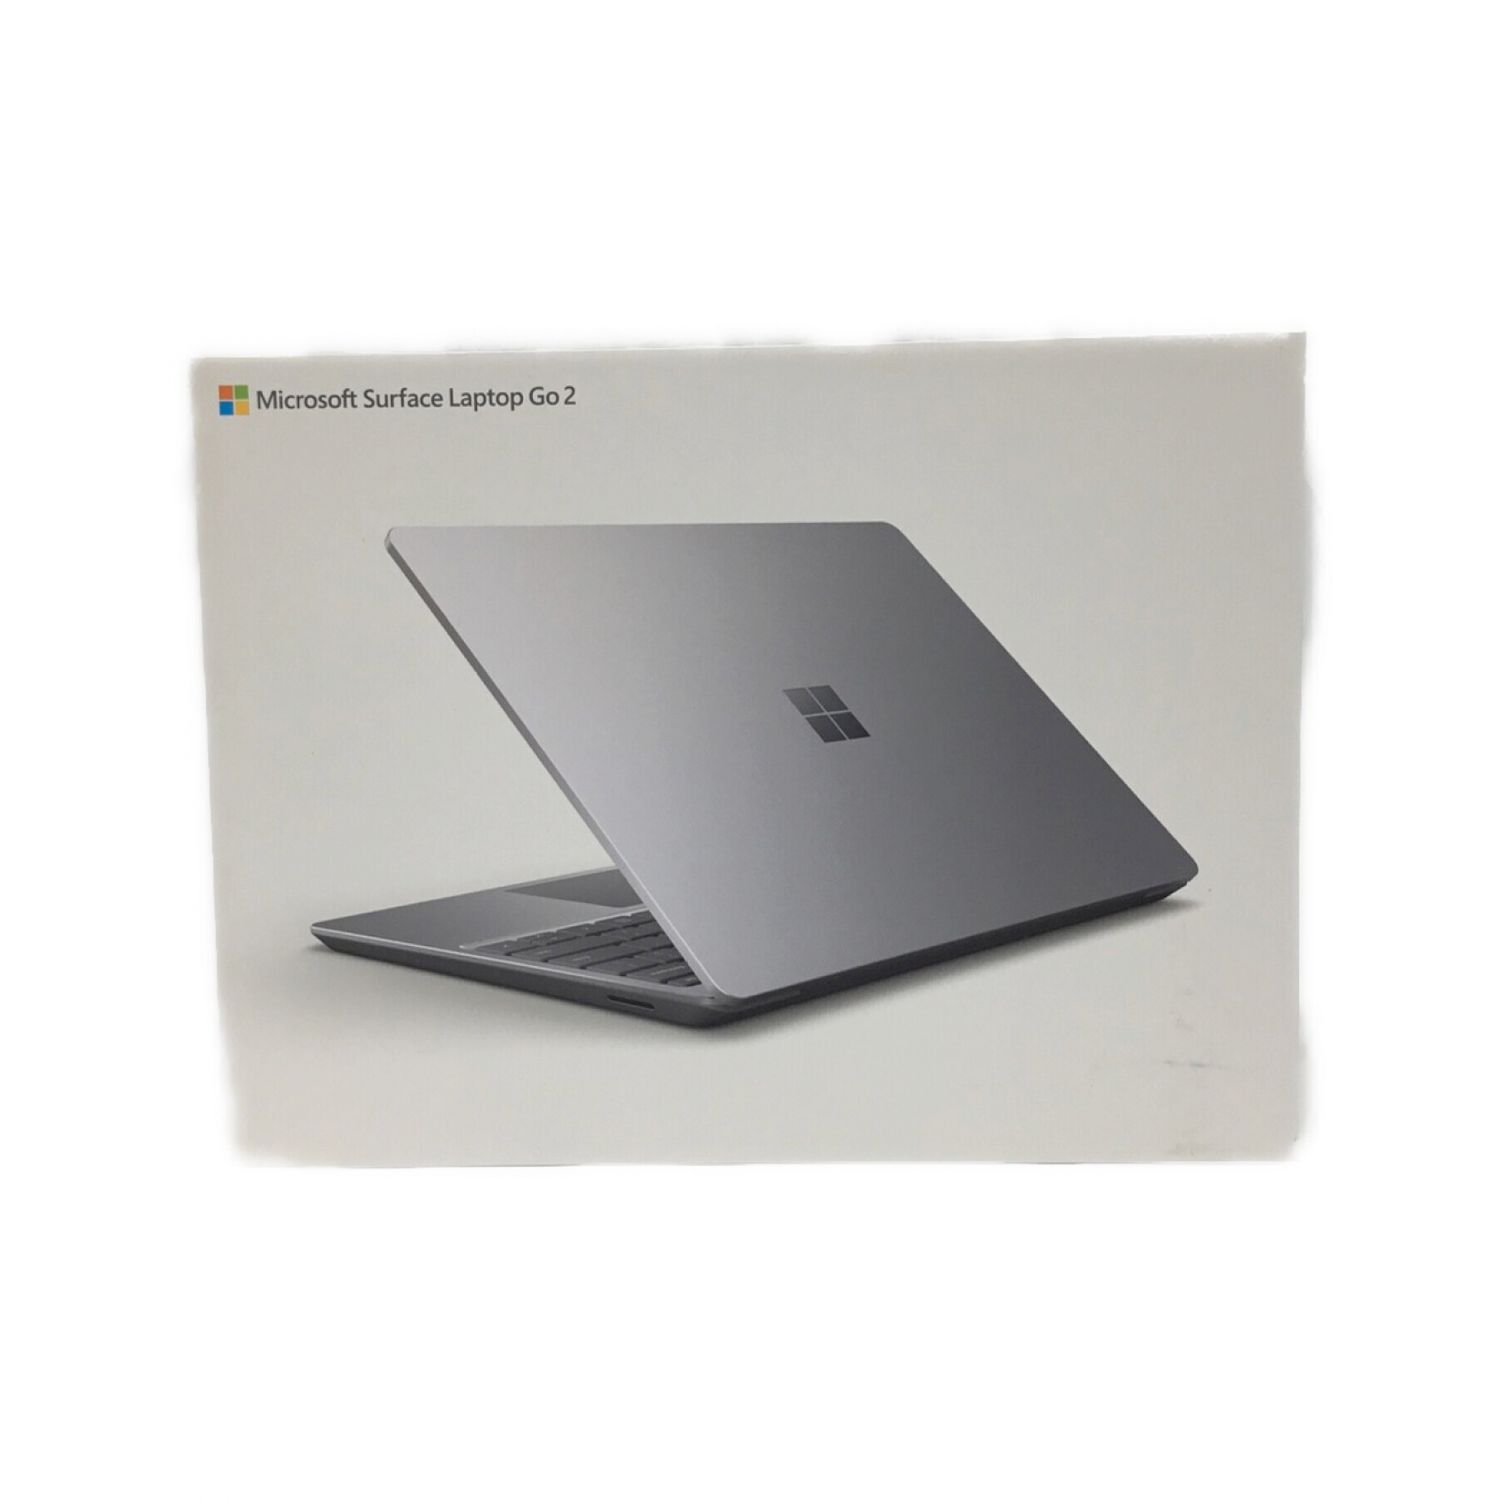 Microsoft (マイクロソフト) Surface Laptop go 2 8QF-00040 12.4 ...